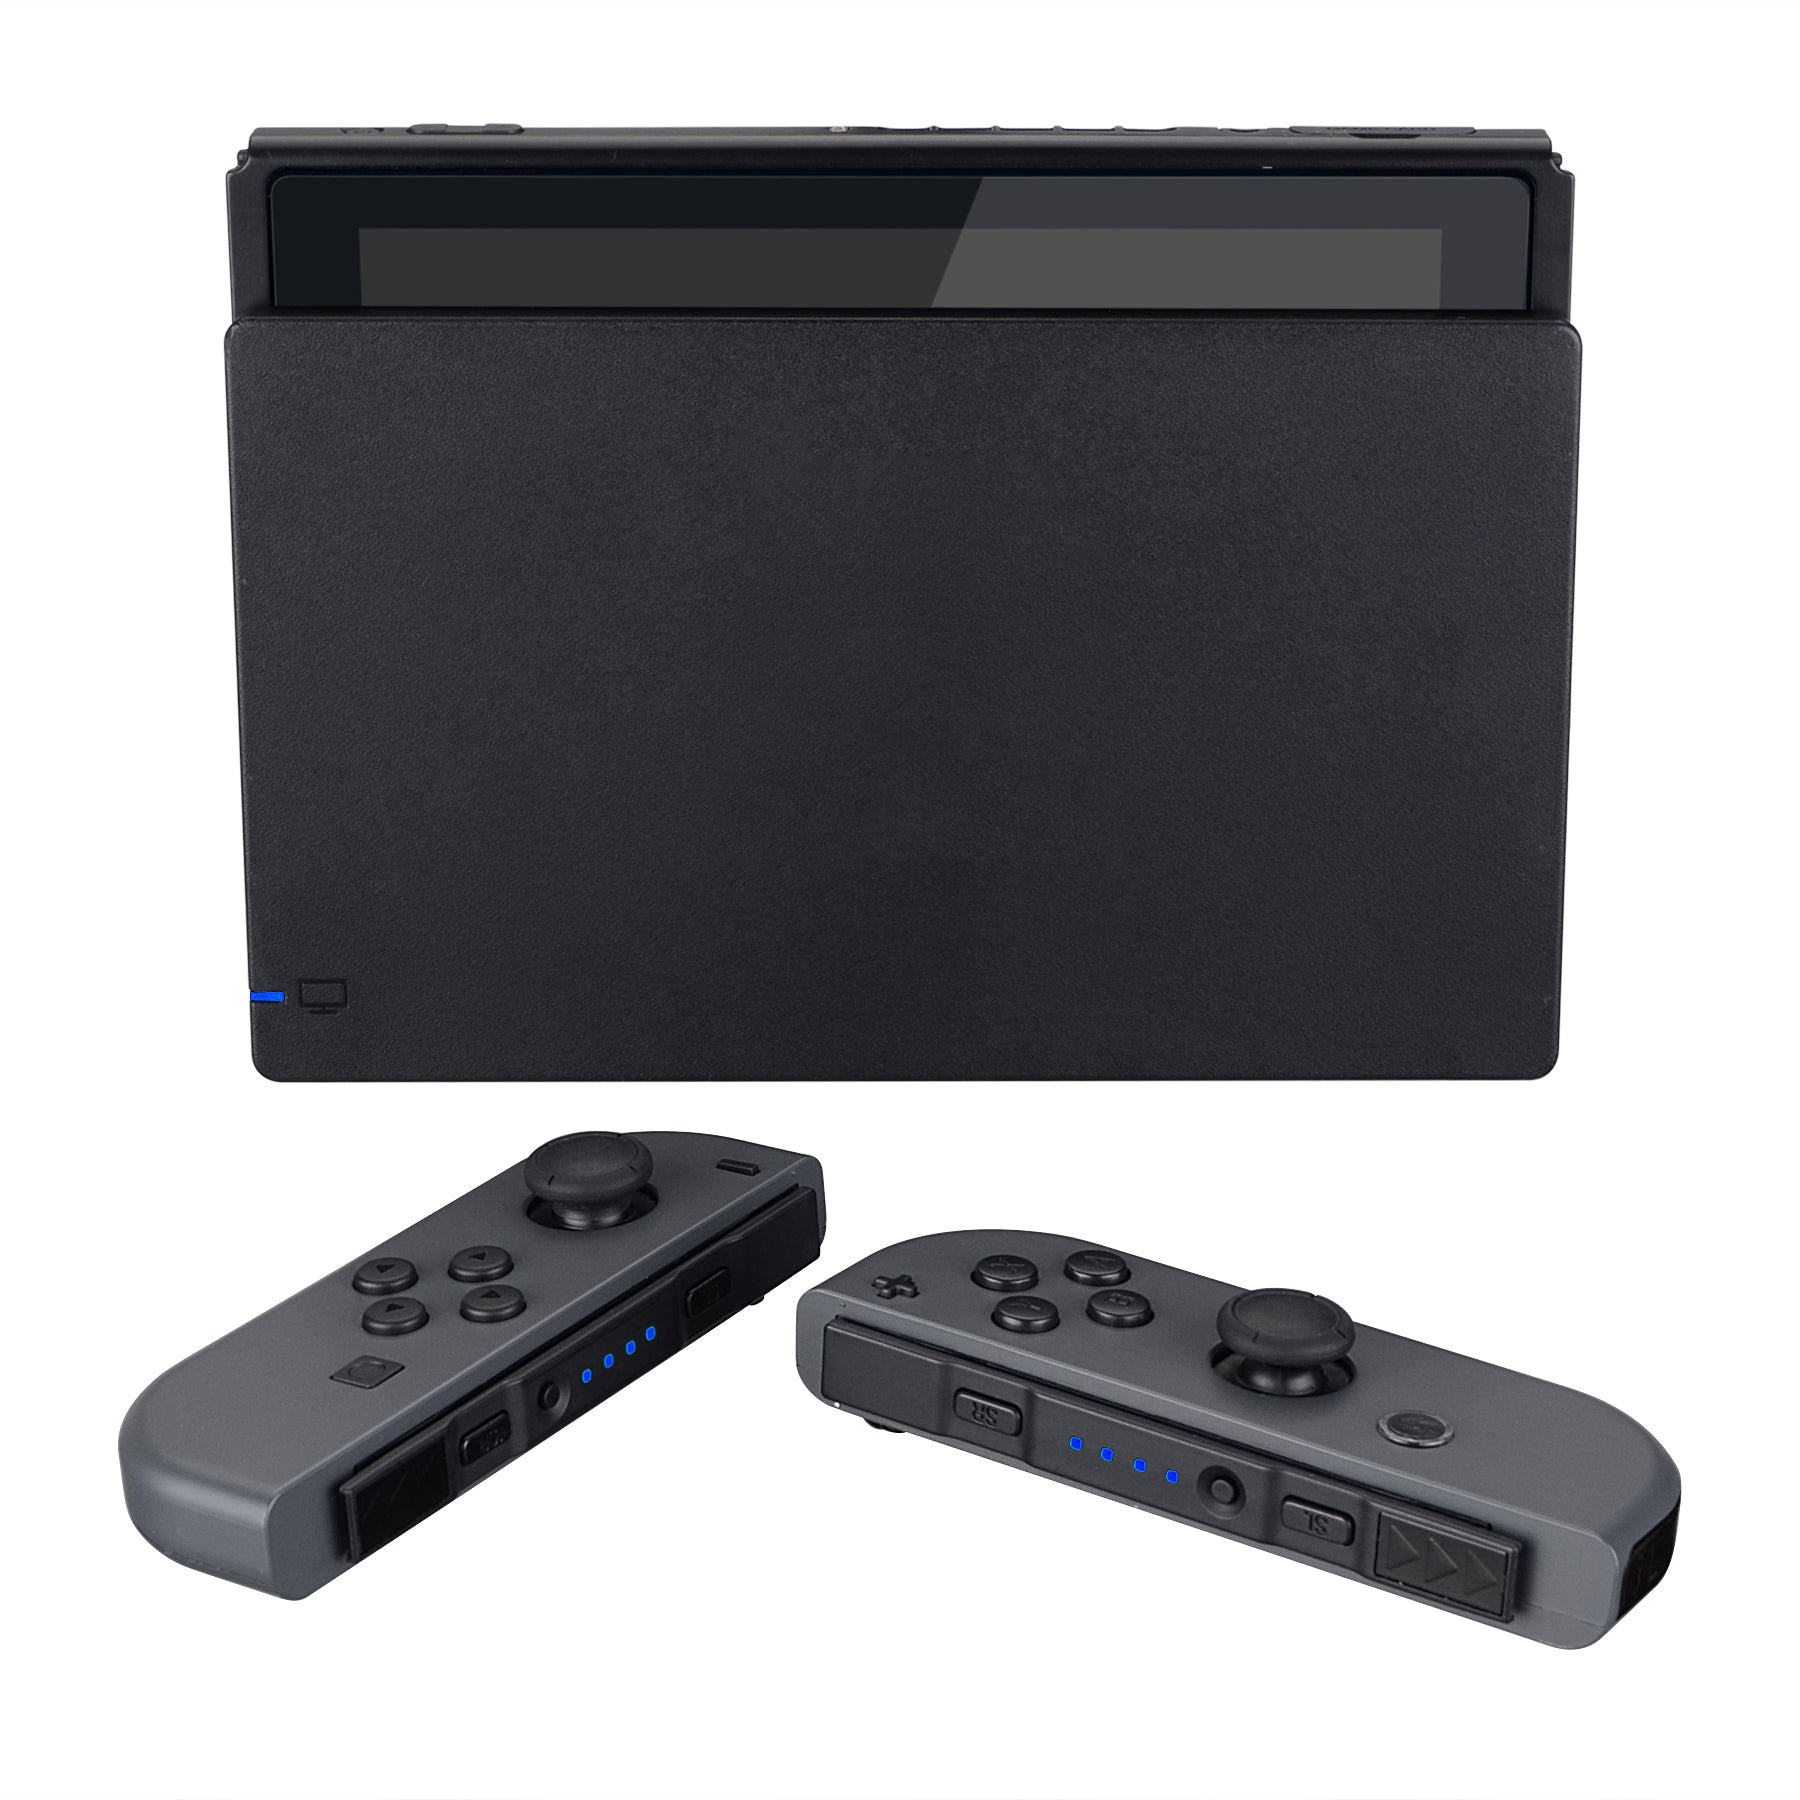 eXtremeRate Firefly LED Tuning Kit for Joycons Dock of NS Switch - Blue